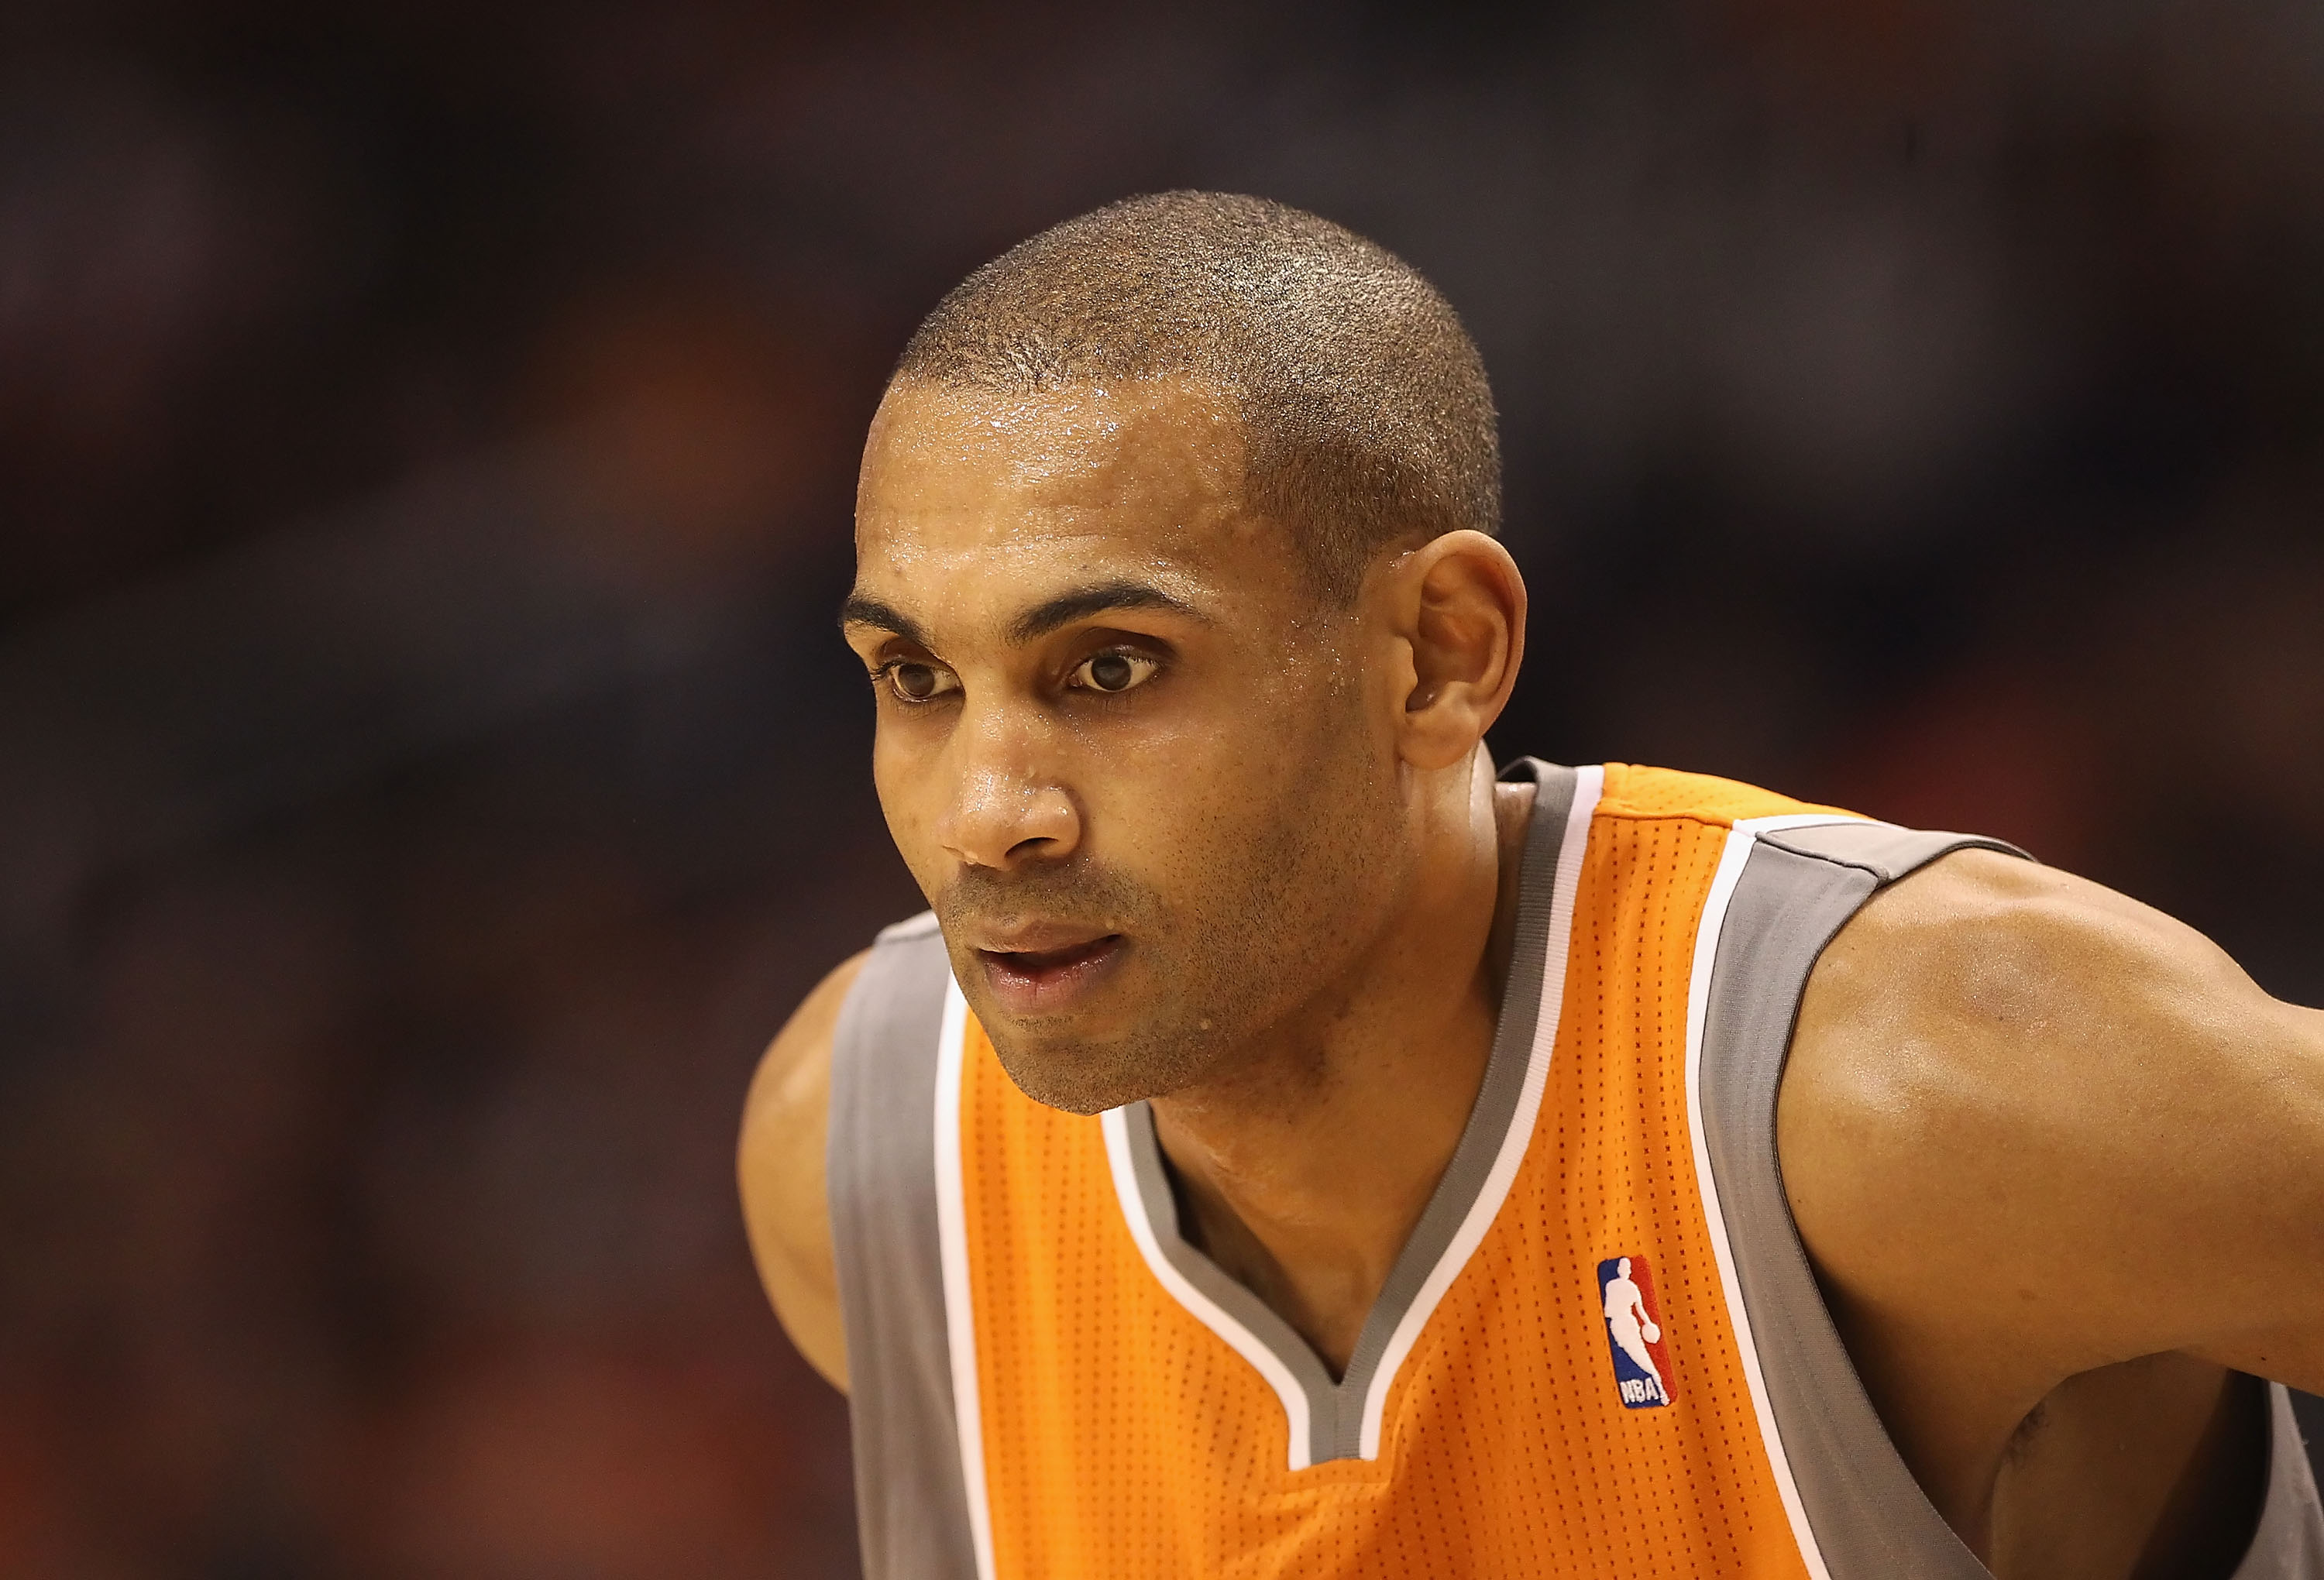 A Deadly Infection Nearly Ended Grant Hill's NBA Career and Life